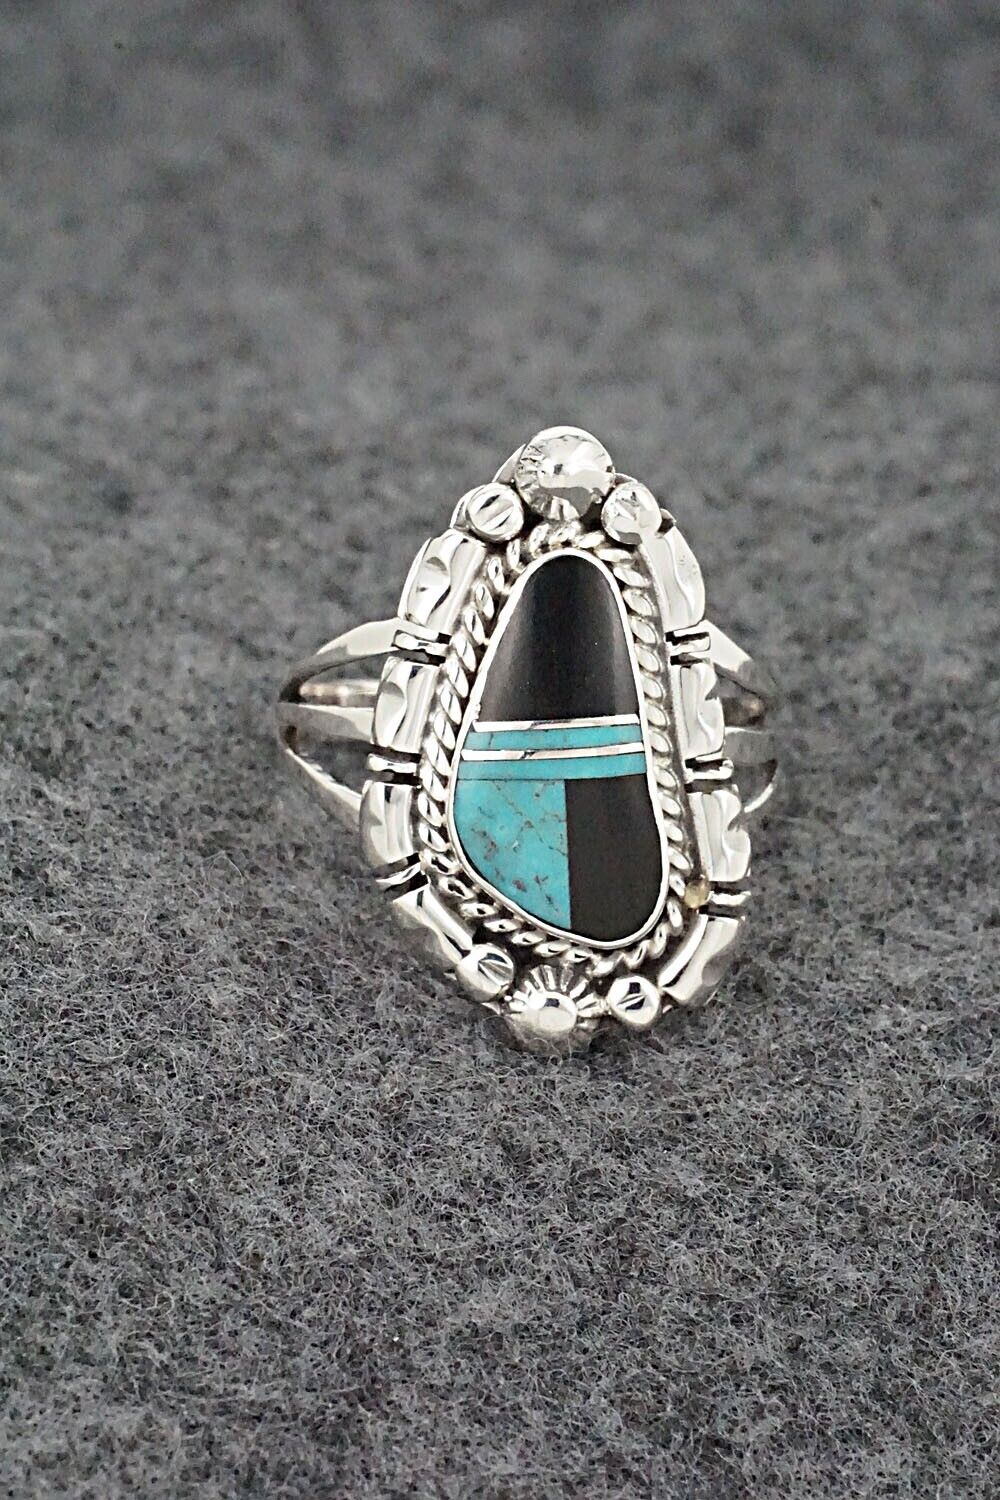 Turquoise, Onyx & Sterling Silver Ring - James Manygoats - Size 9.5